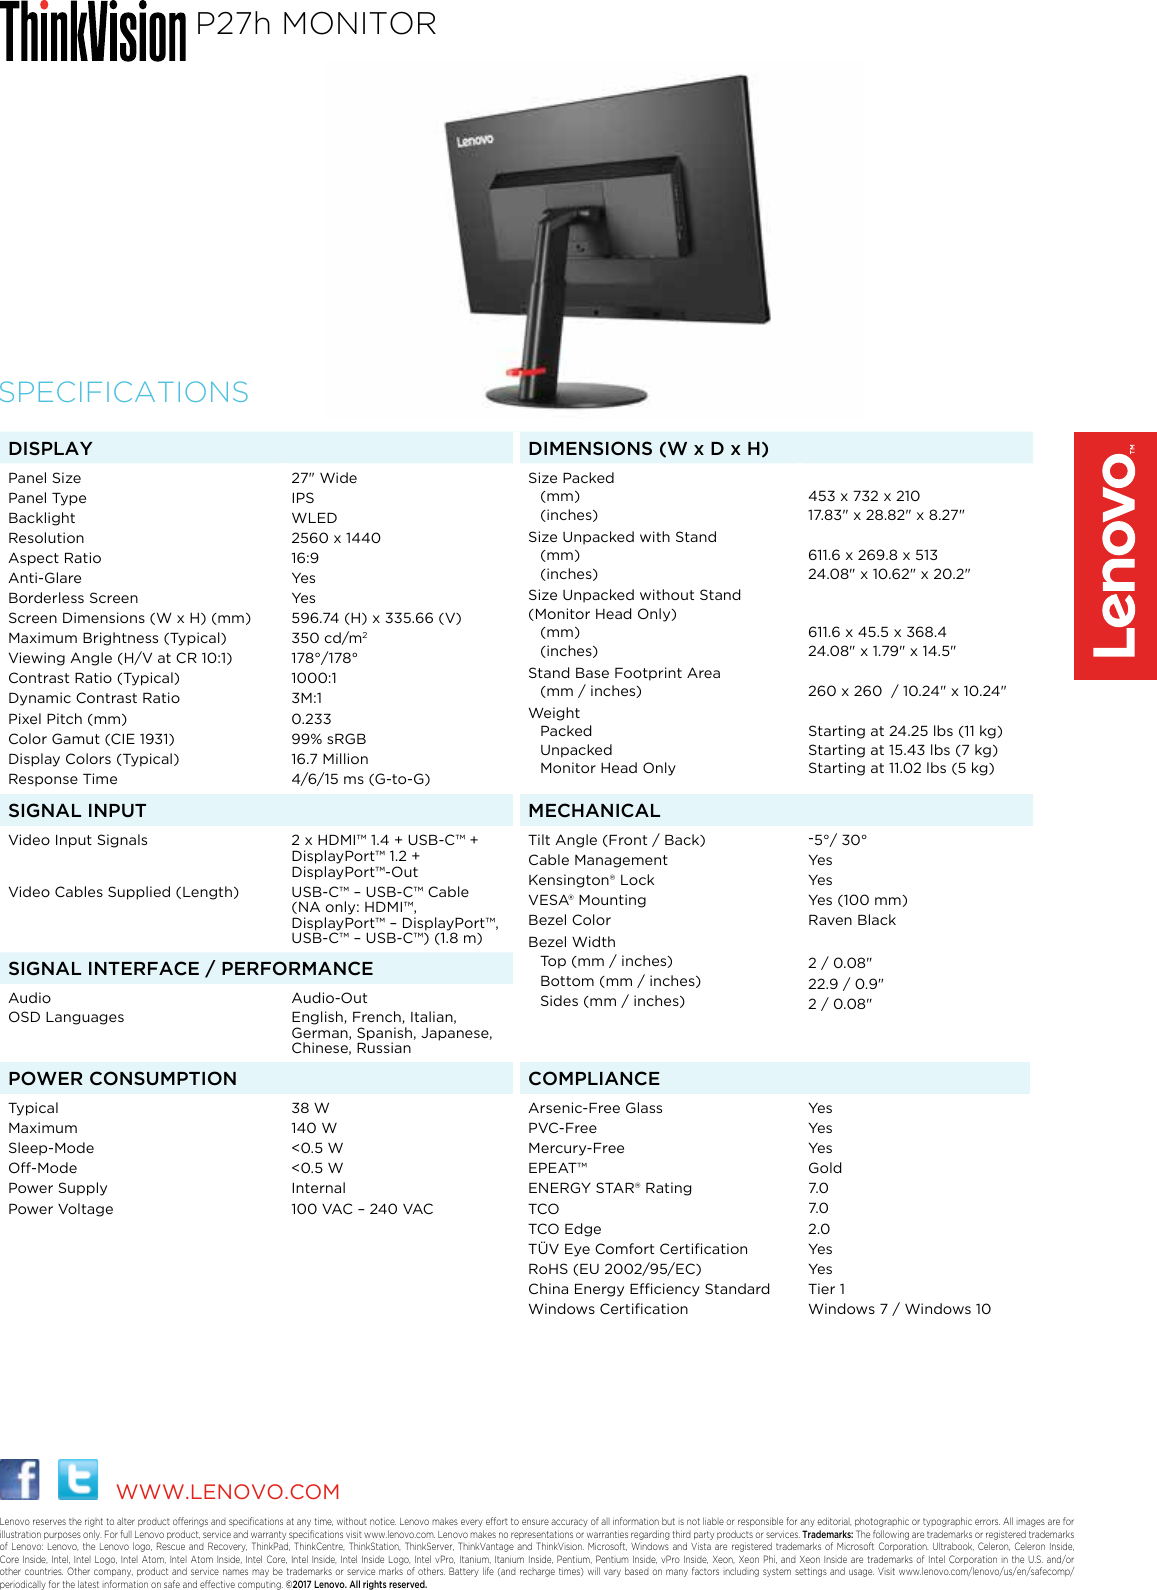 Page 2 of 2 - Lenovo P27H10 Overview ThinkVision P27h Monitor_DS User Manual Think Vision P27h-10 - Type 61AF